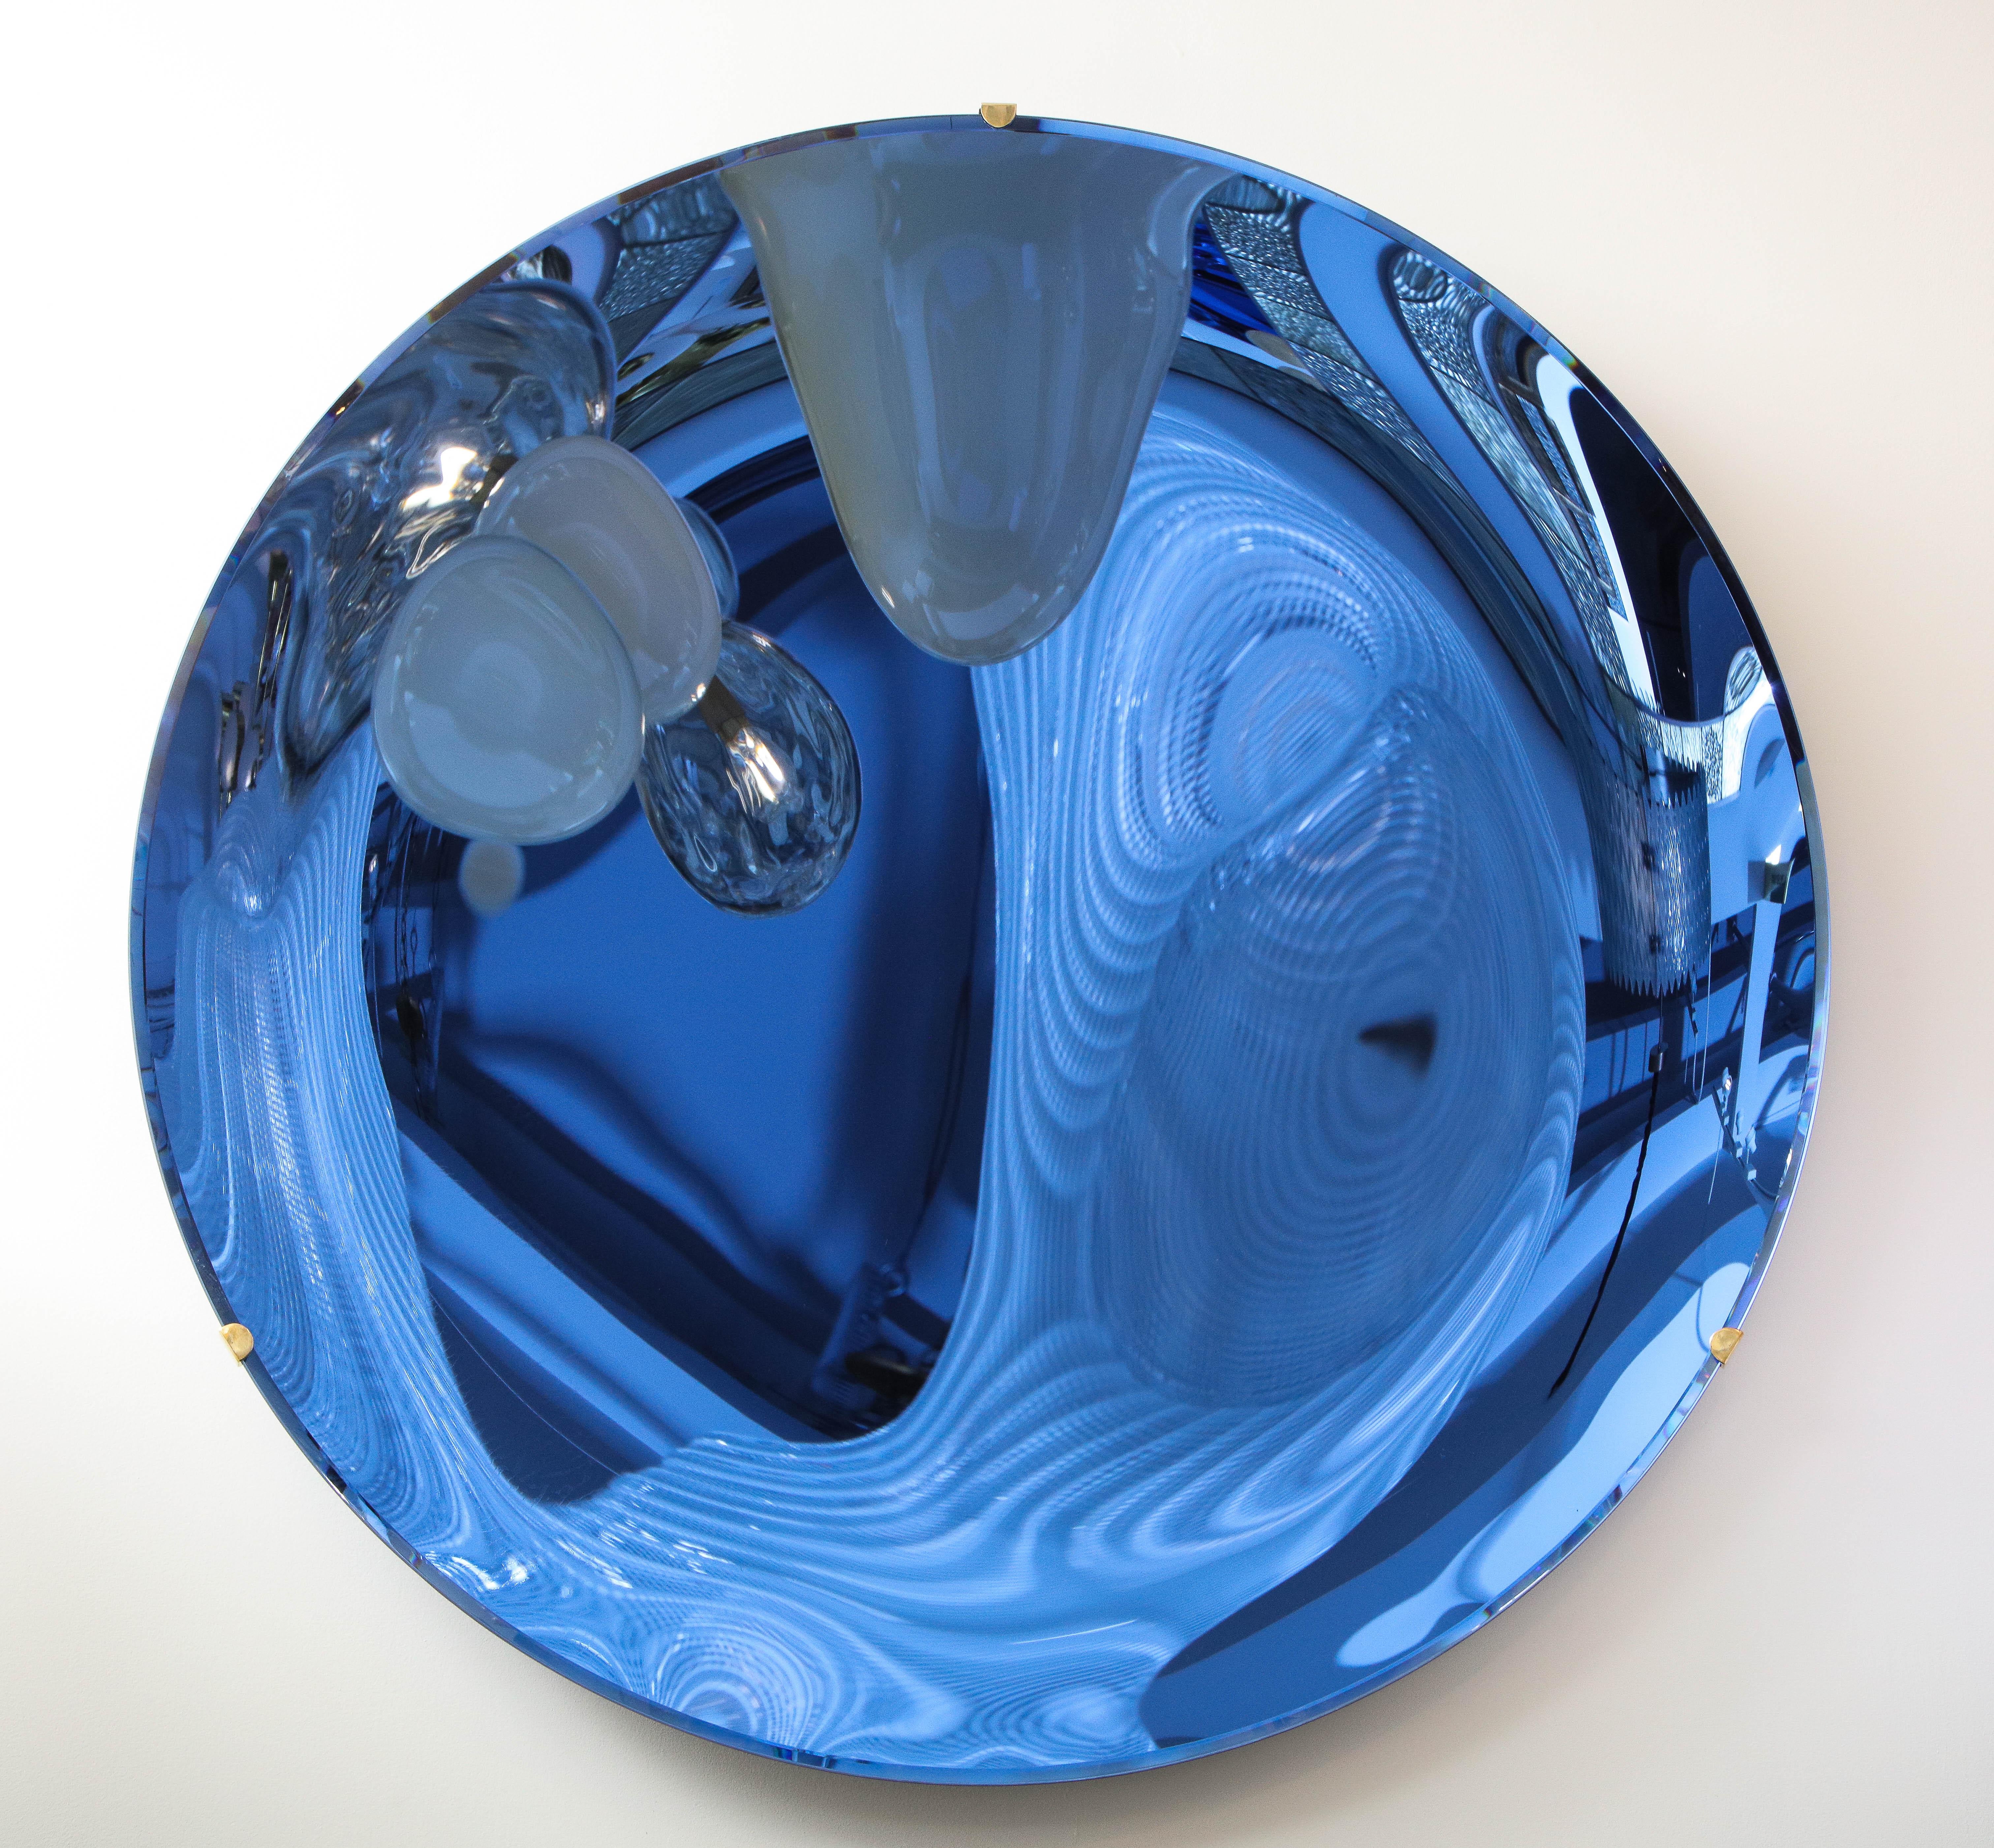 Hand-Crafted Large Sculptural Round Concave Cobalt Blue Mirror or Wall Sculpture, Italy, 2021